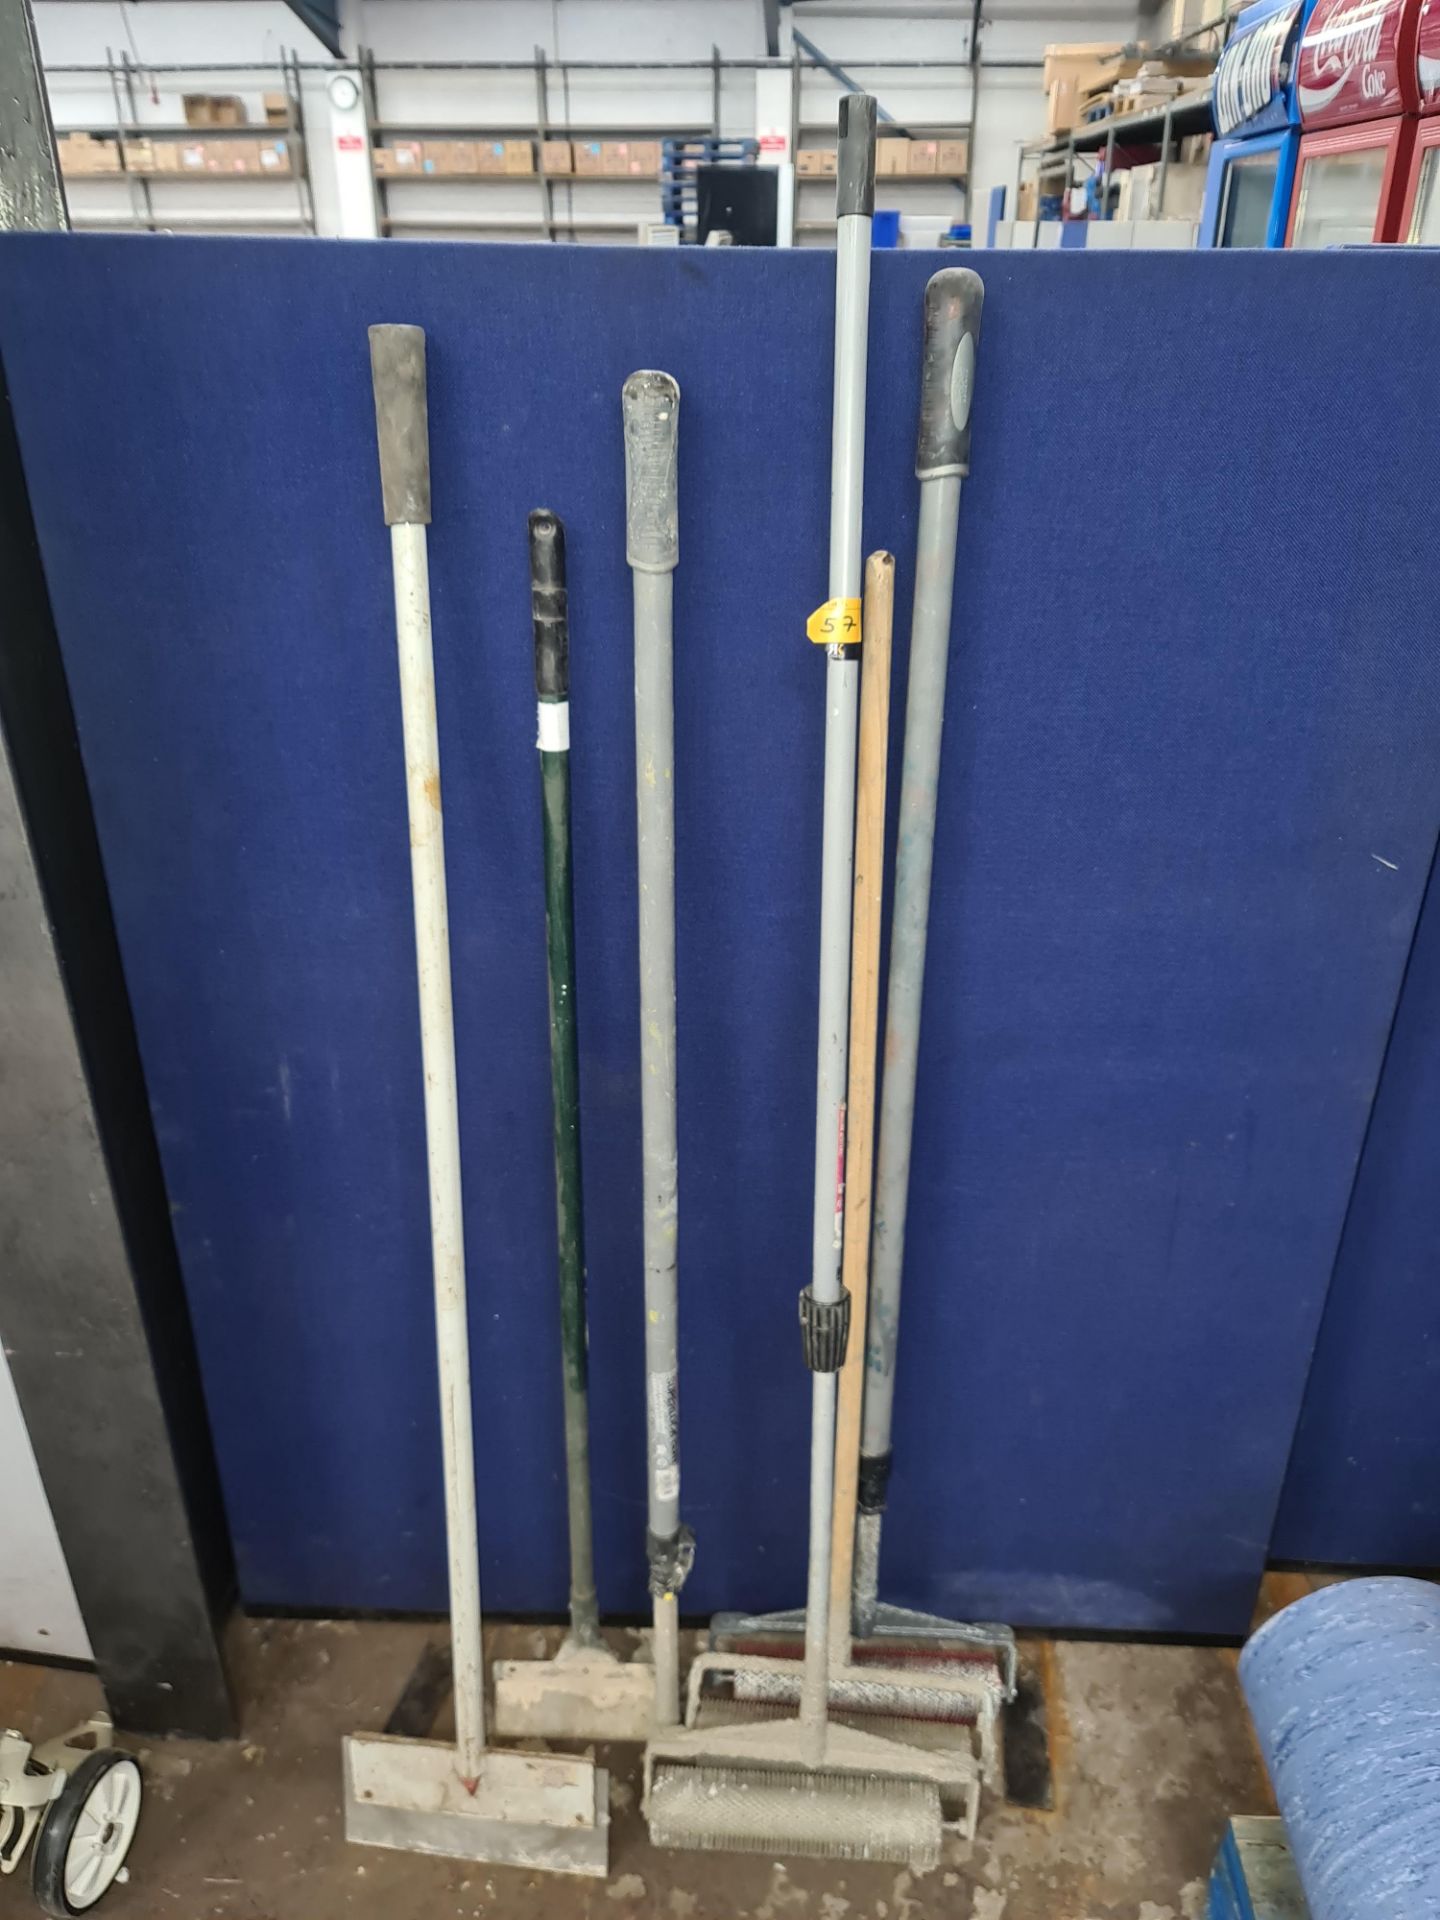 6 off assorted long handled implements for use with the laying of assorted types of flooring